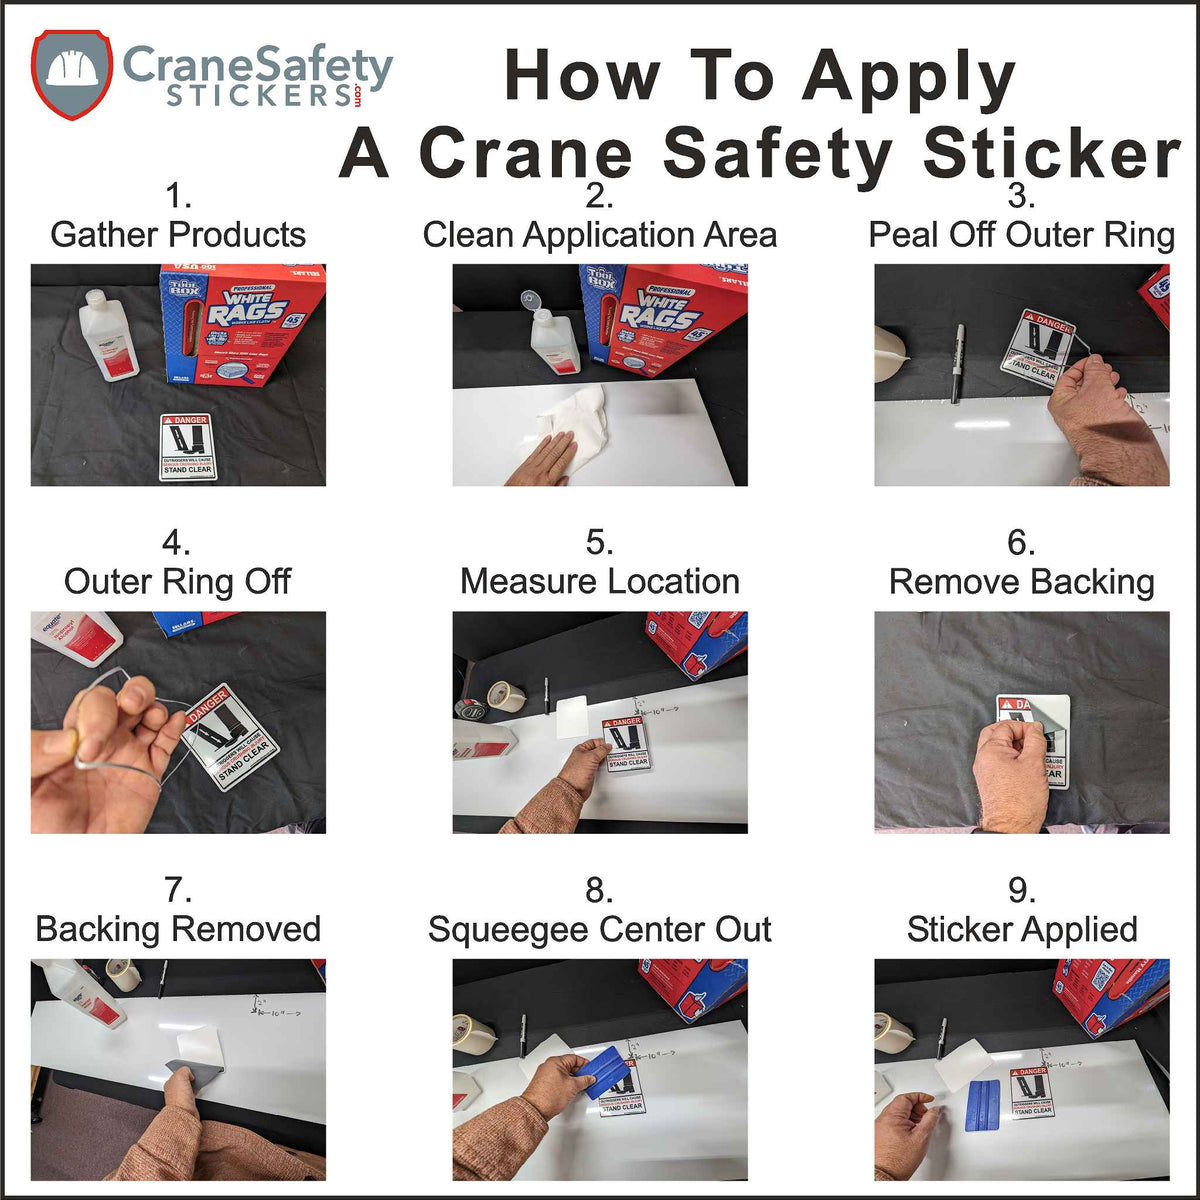 Directions on how to apply our crane tipping hazard sticker.